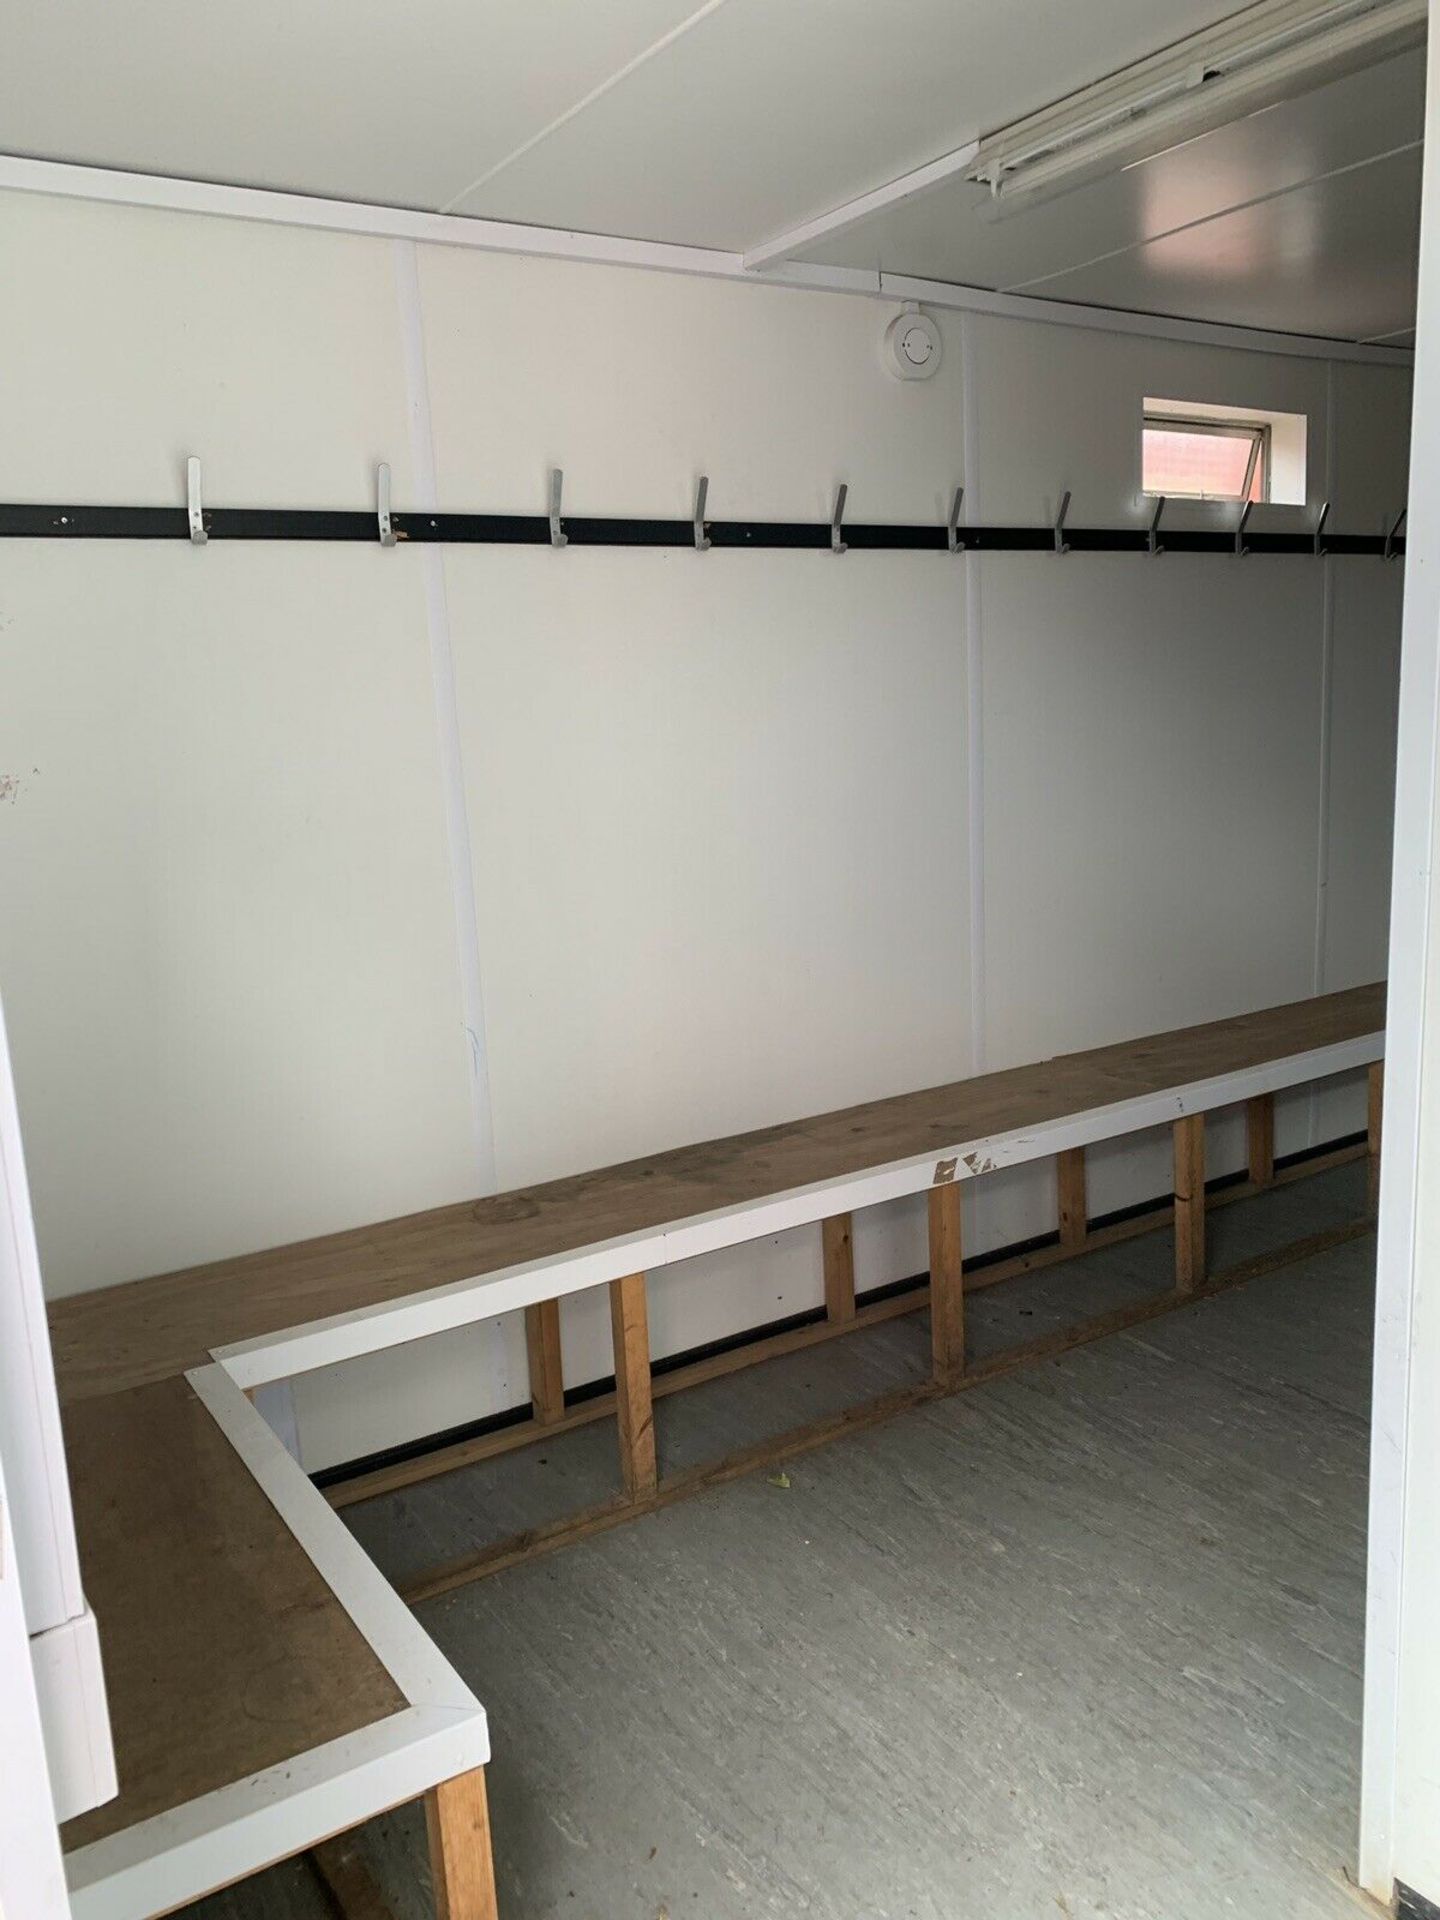 Anti Vandal Steel Portable Shower Block Drying Room With Toilet - Image 3 of 12